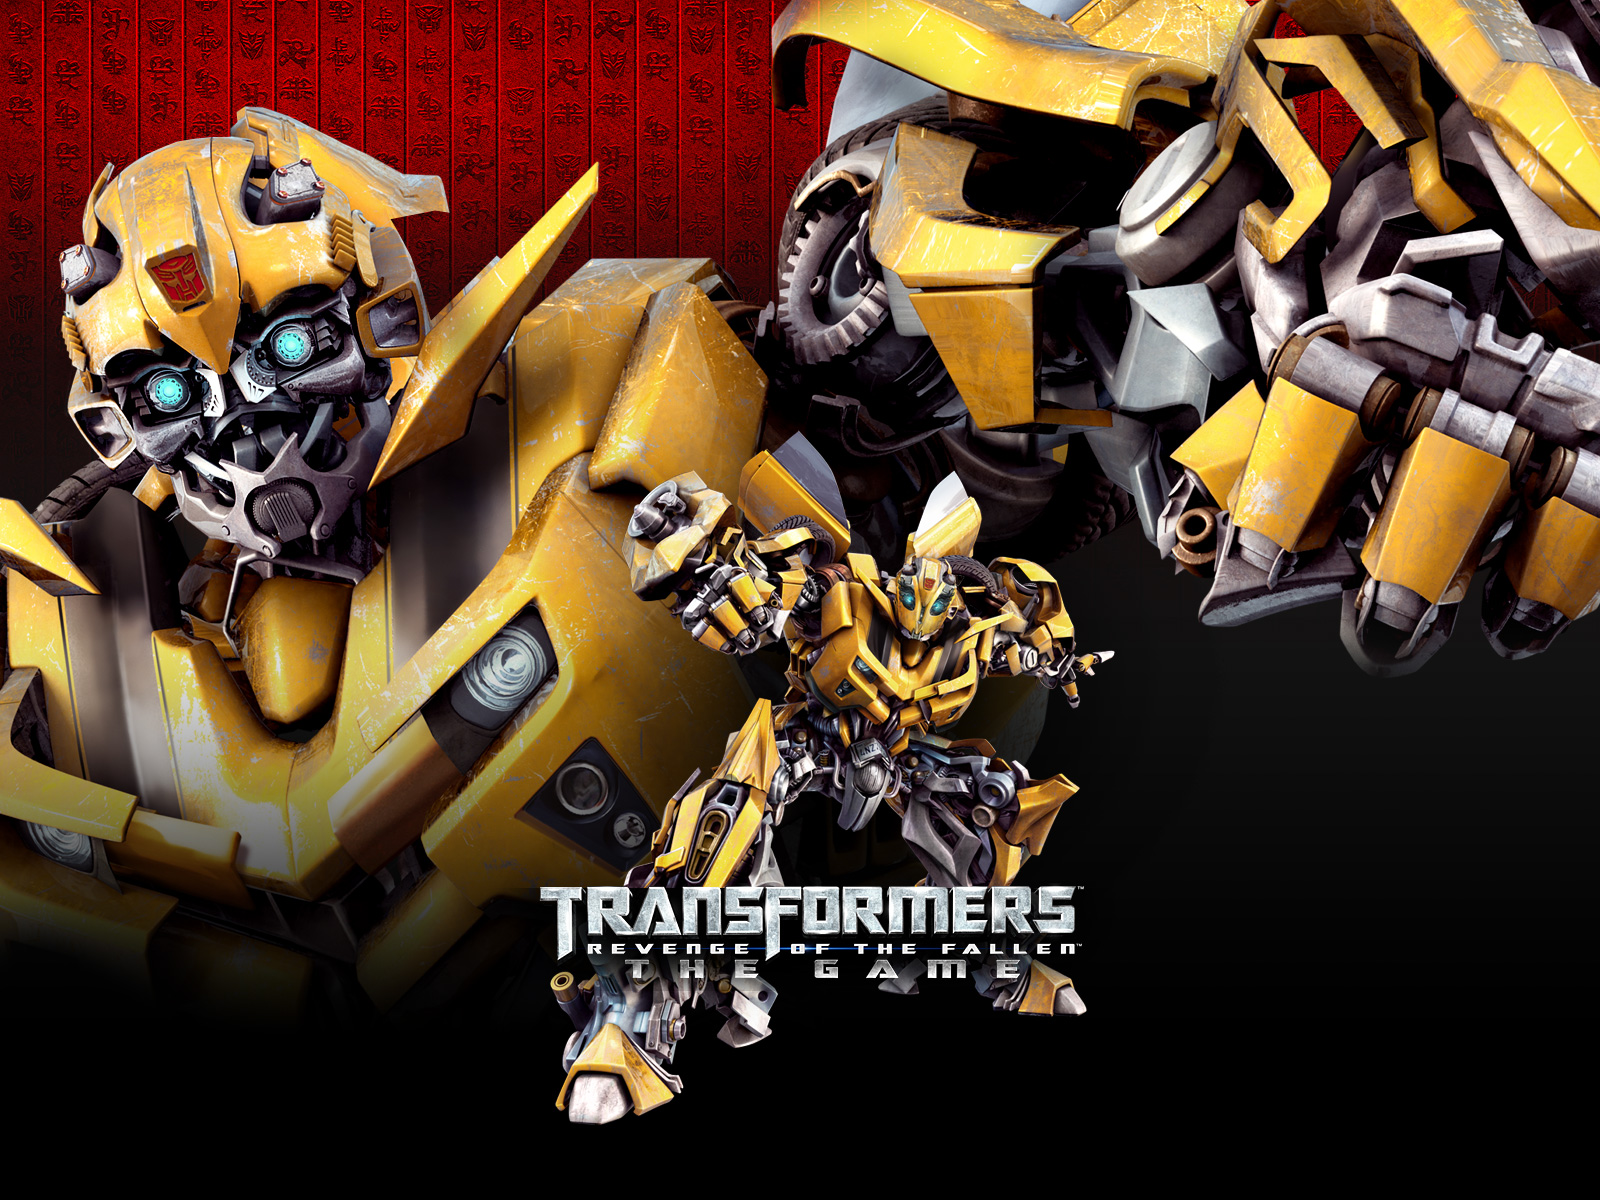 Transformers Pc Game Cover - HD Wallpaper 